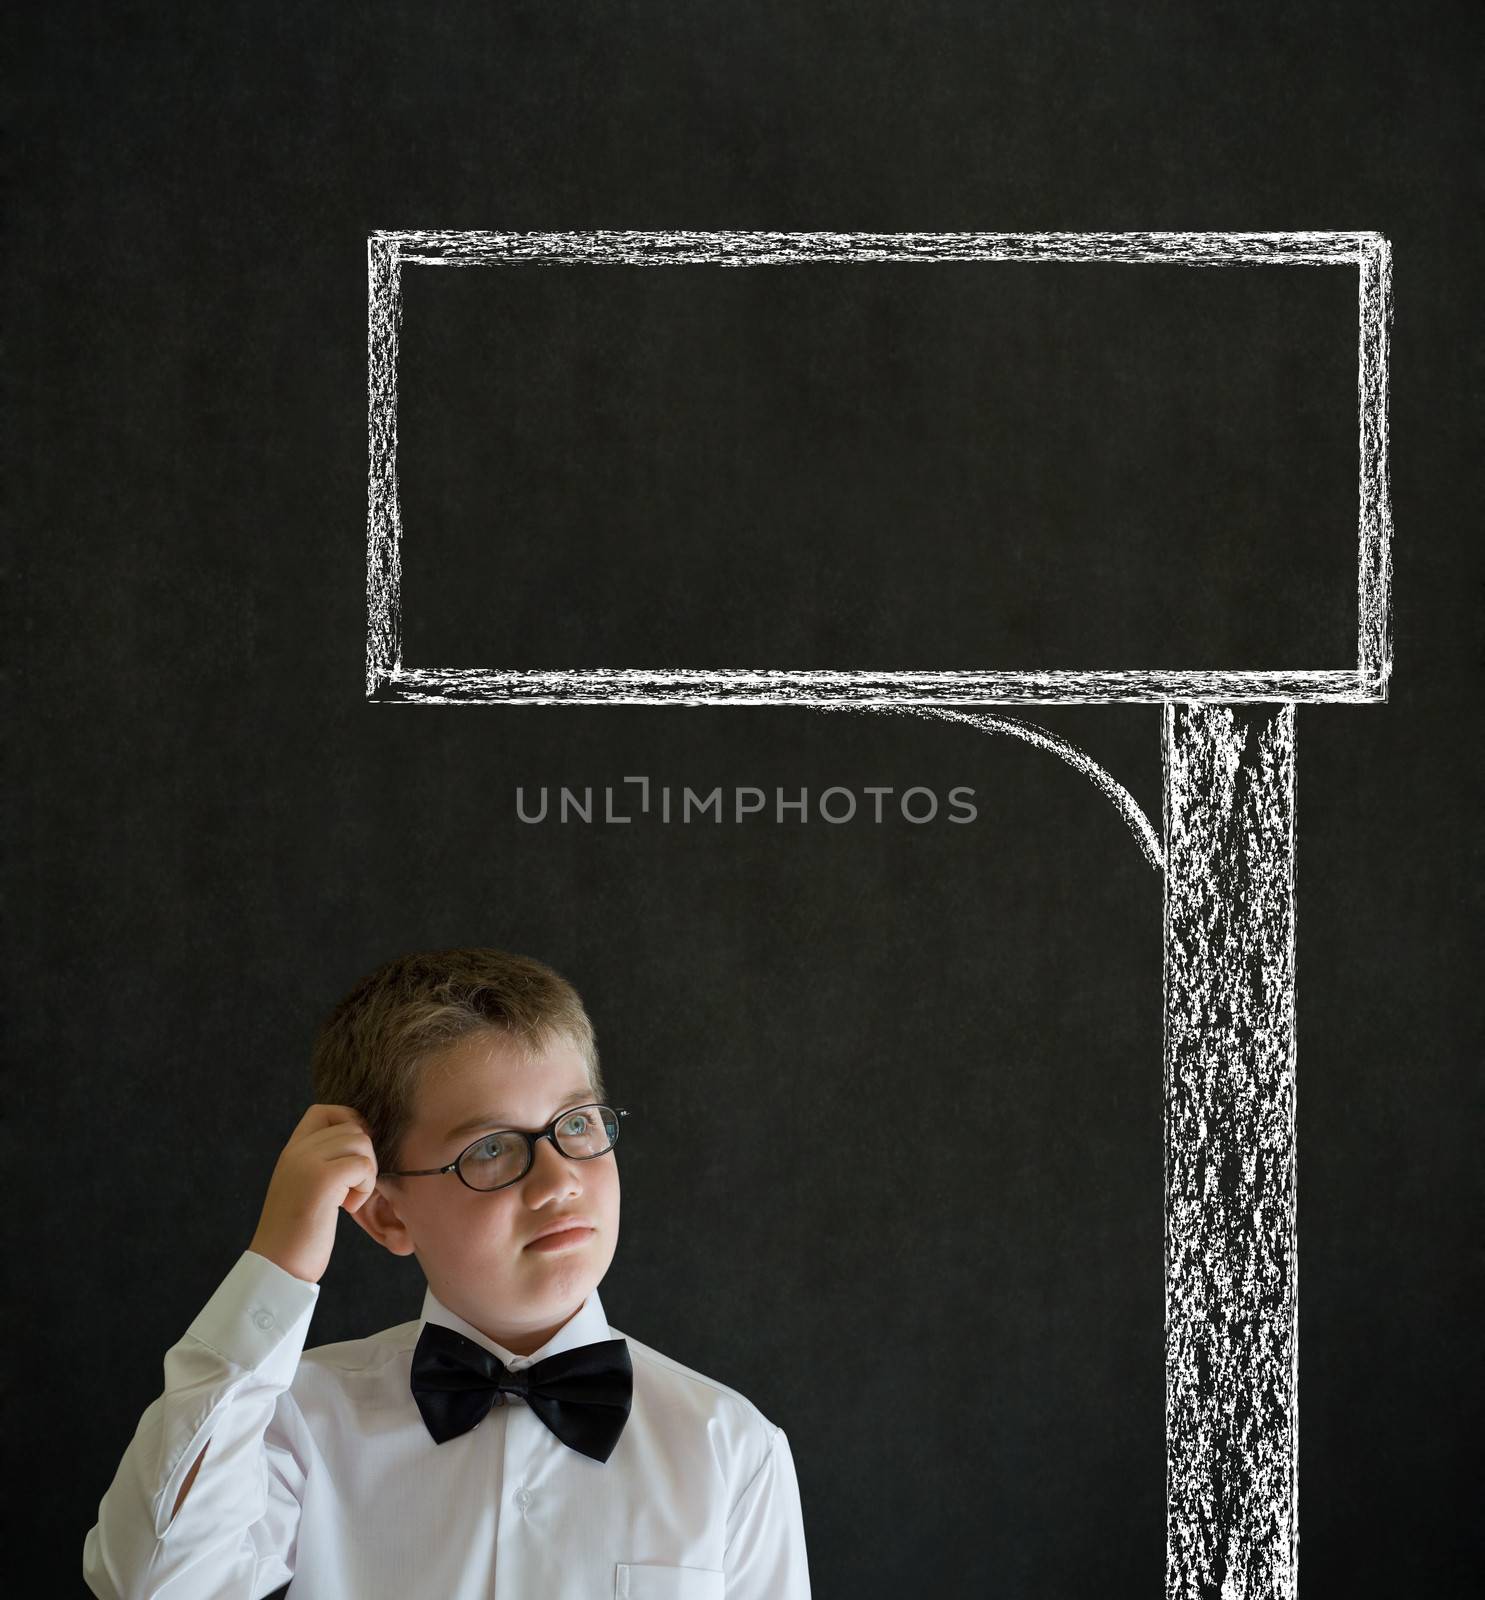 Scratching head thinking boy dressed up as business man with chalk road advertising sign on blackboard background